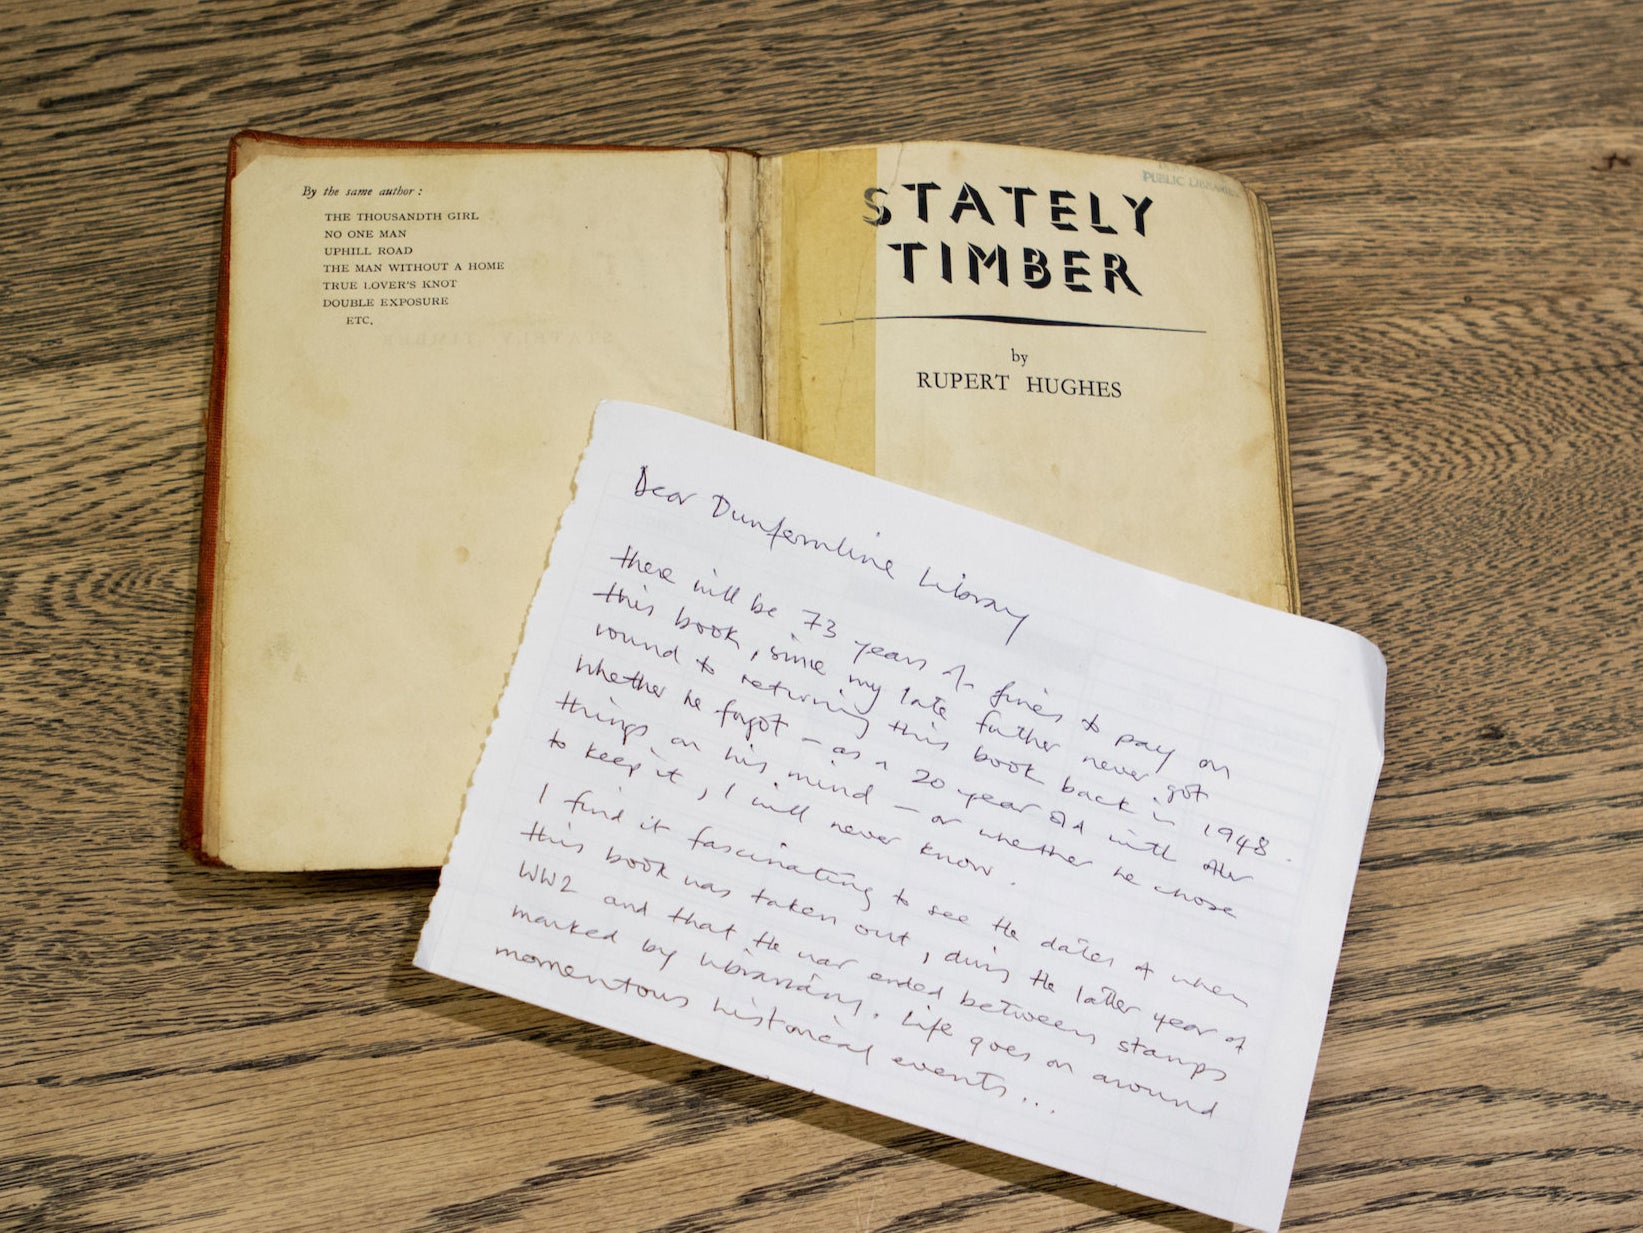 A library book that has been returned more than 73 years late with a note